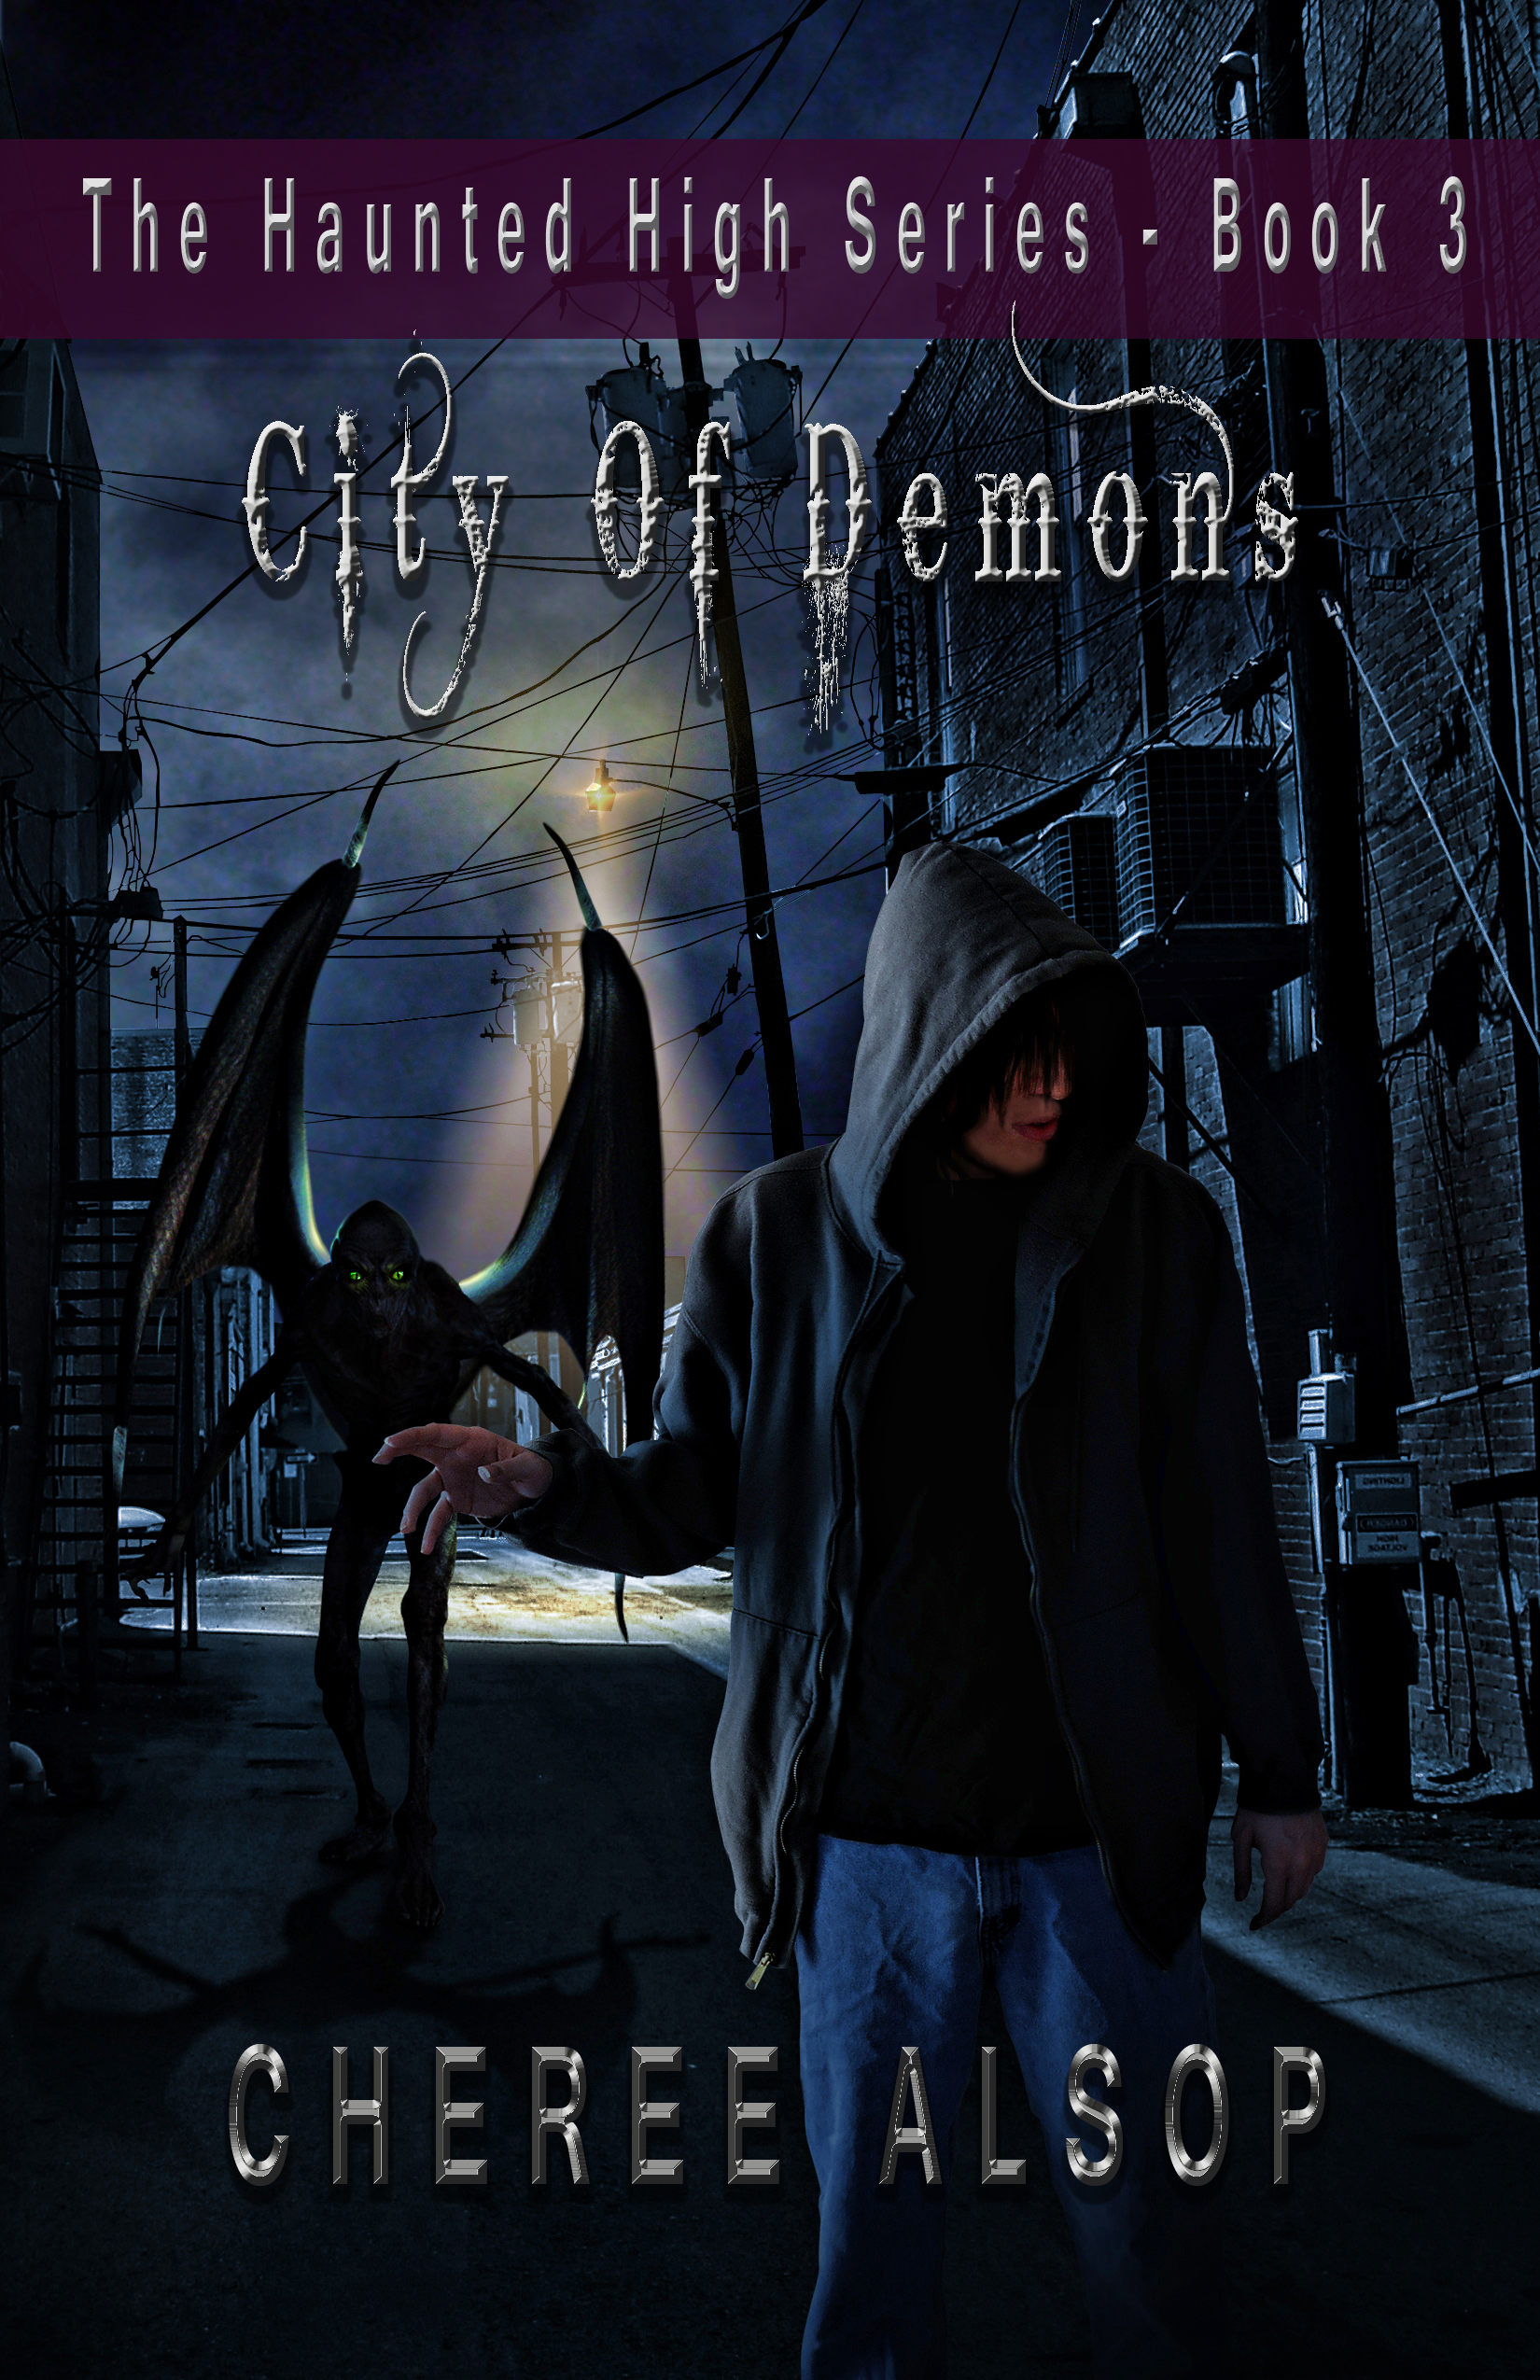 The Haunted High Series Book 3- City of Demons by Cheree Alsop